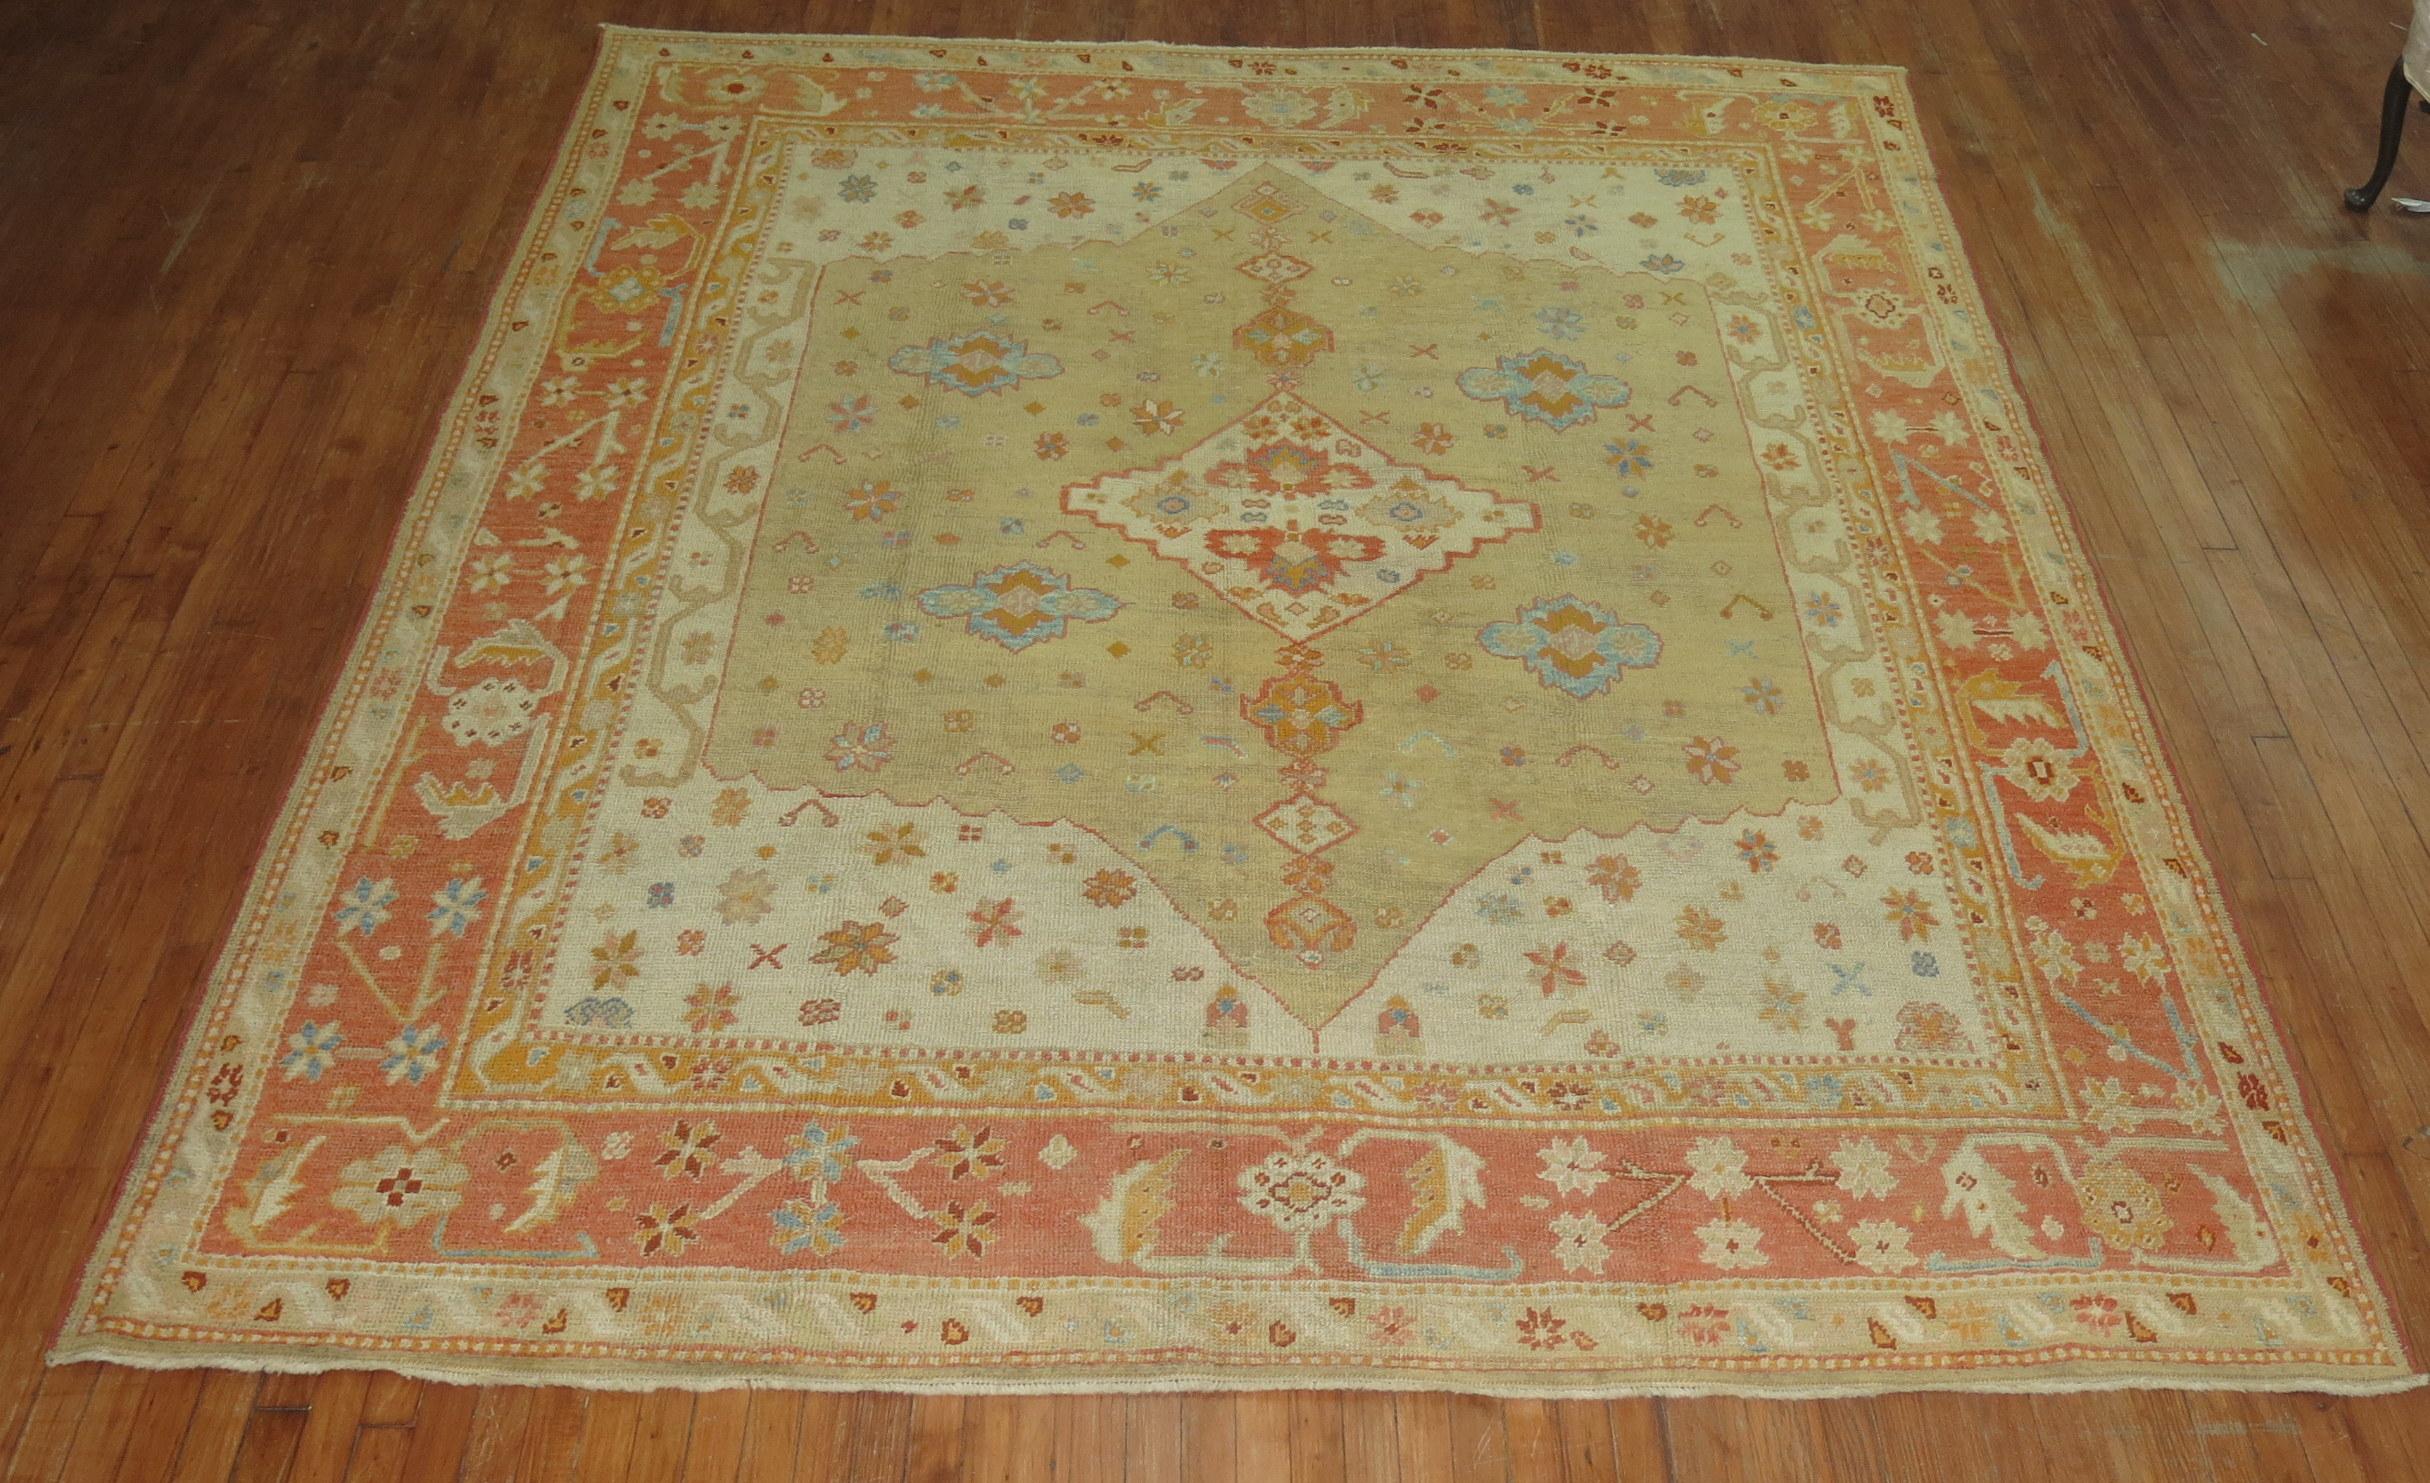 Stunning early 20th century ivory field orange antique Turkish Oushak rug some hints of light blue and coral accents on a caramel background

Measures: 8'5